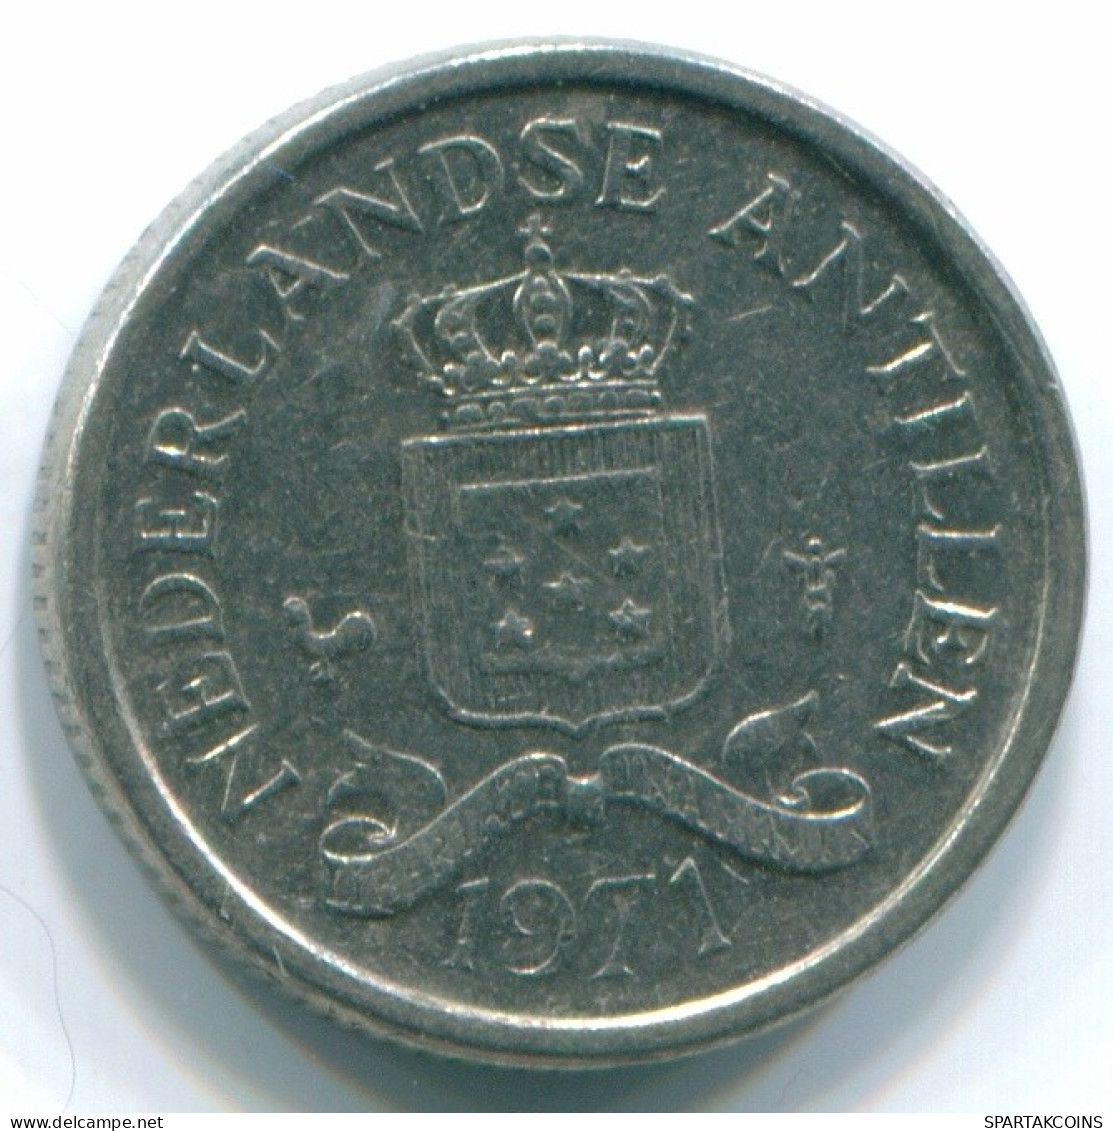 10 CENTS 1971 NETHERLANDS ANTILLES Nickel Colonial Coin #S13448.U.A - Antille Olandesi